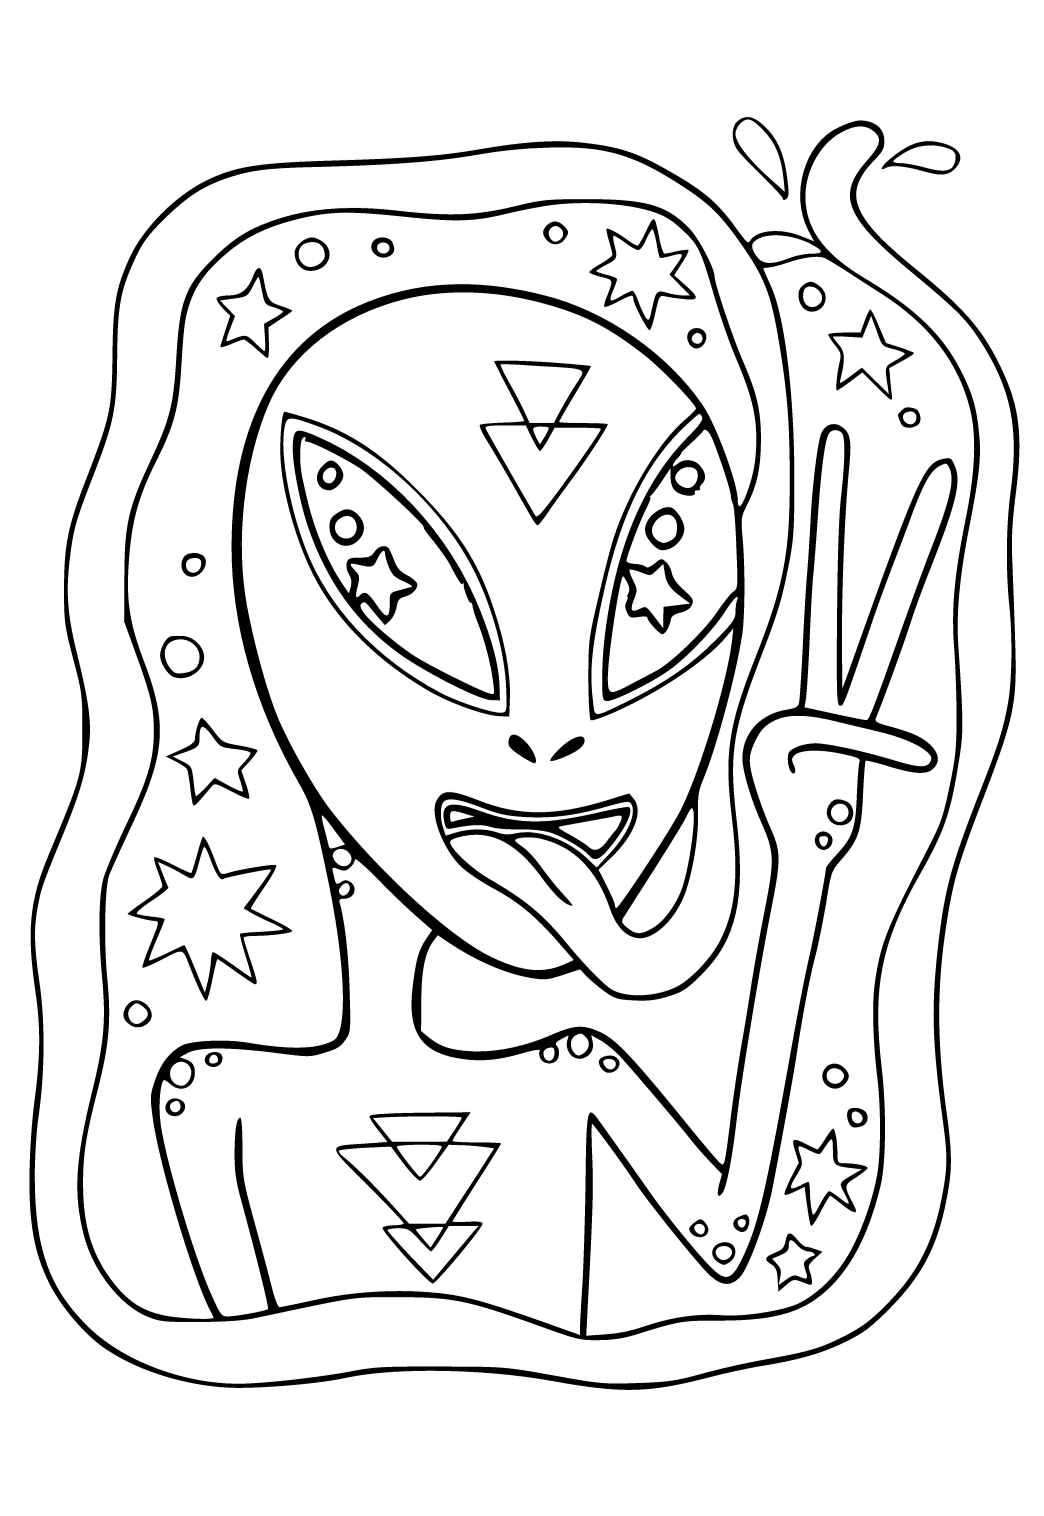 Free printable indie alien coloring page for adults and kids